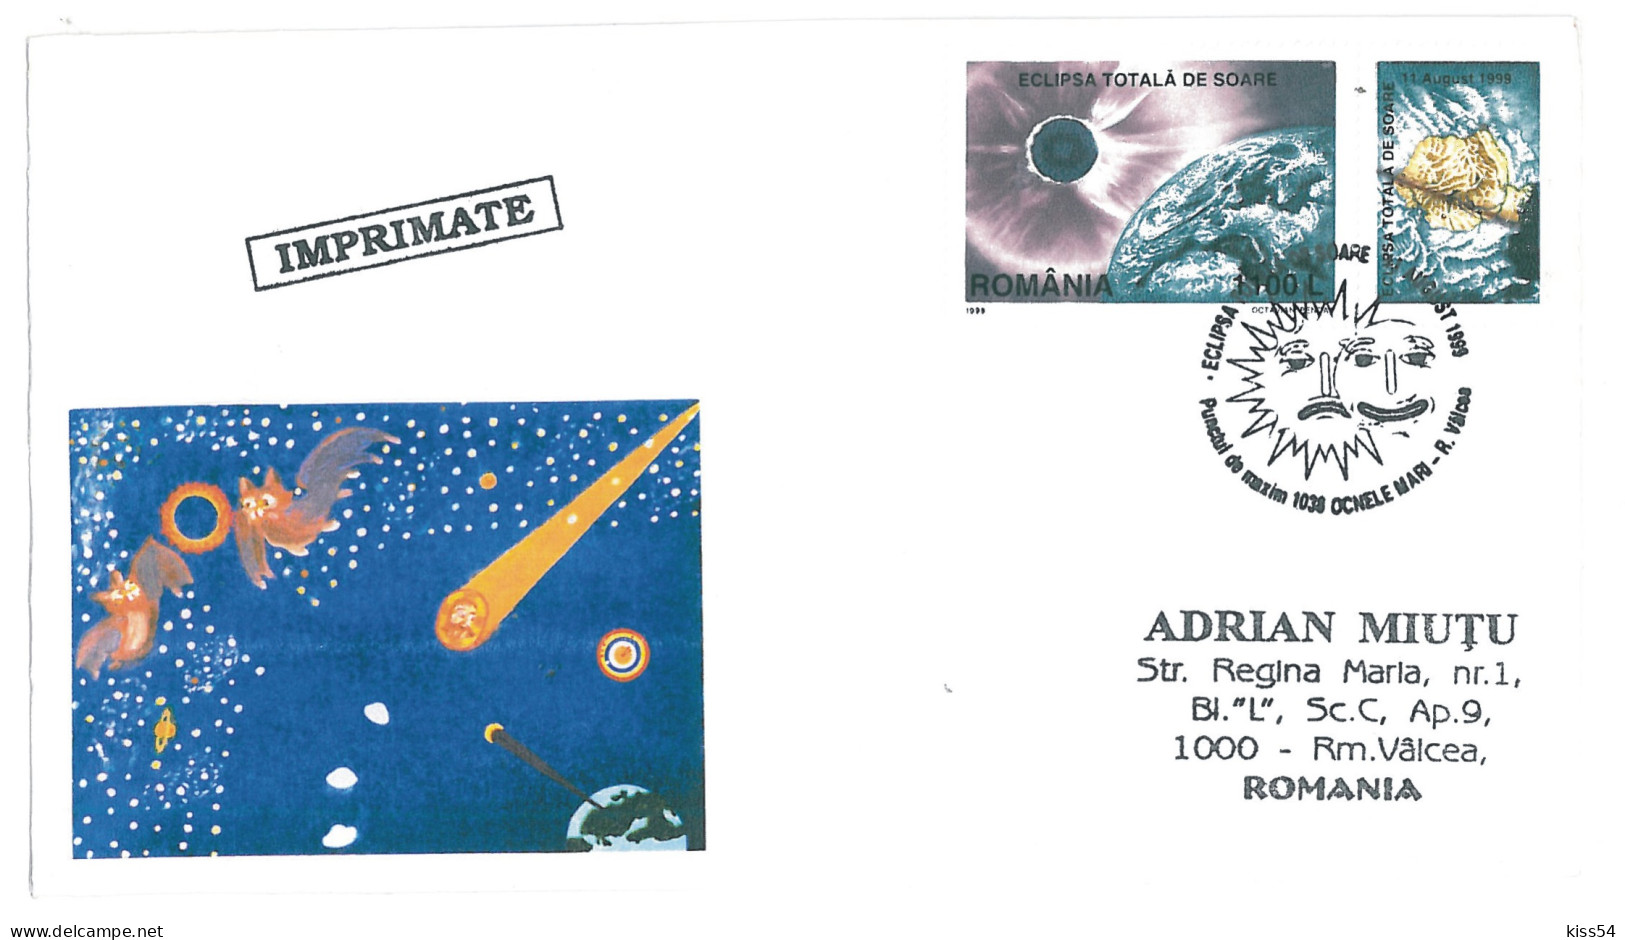 COV 87 - 1513 ASTRONOMY, Total Solar Eclipse, Romania, Stamp With Vignette - Cover - Used - 1999 - Maximum Cards & Covers